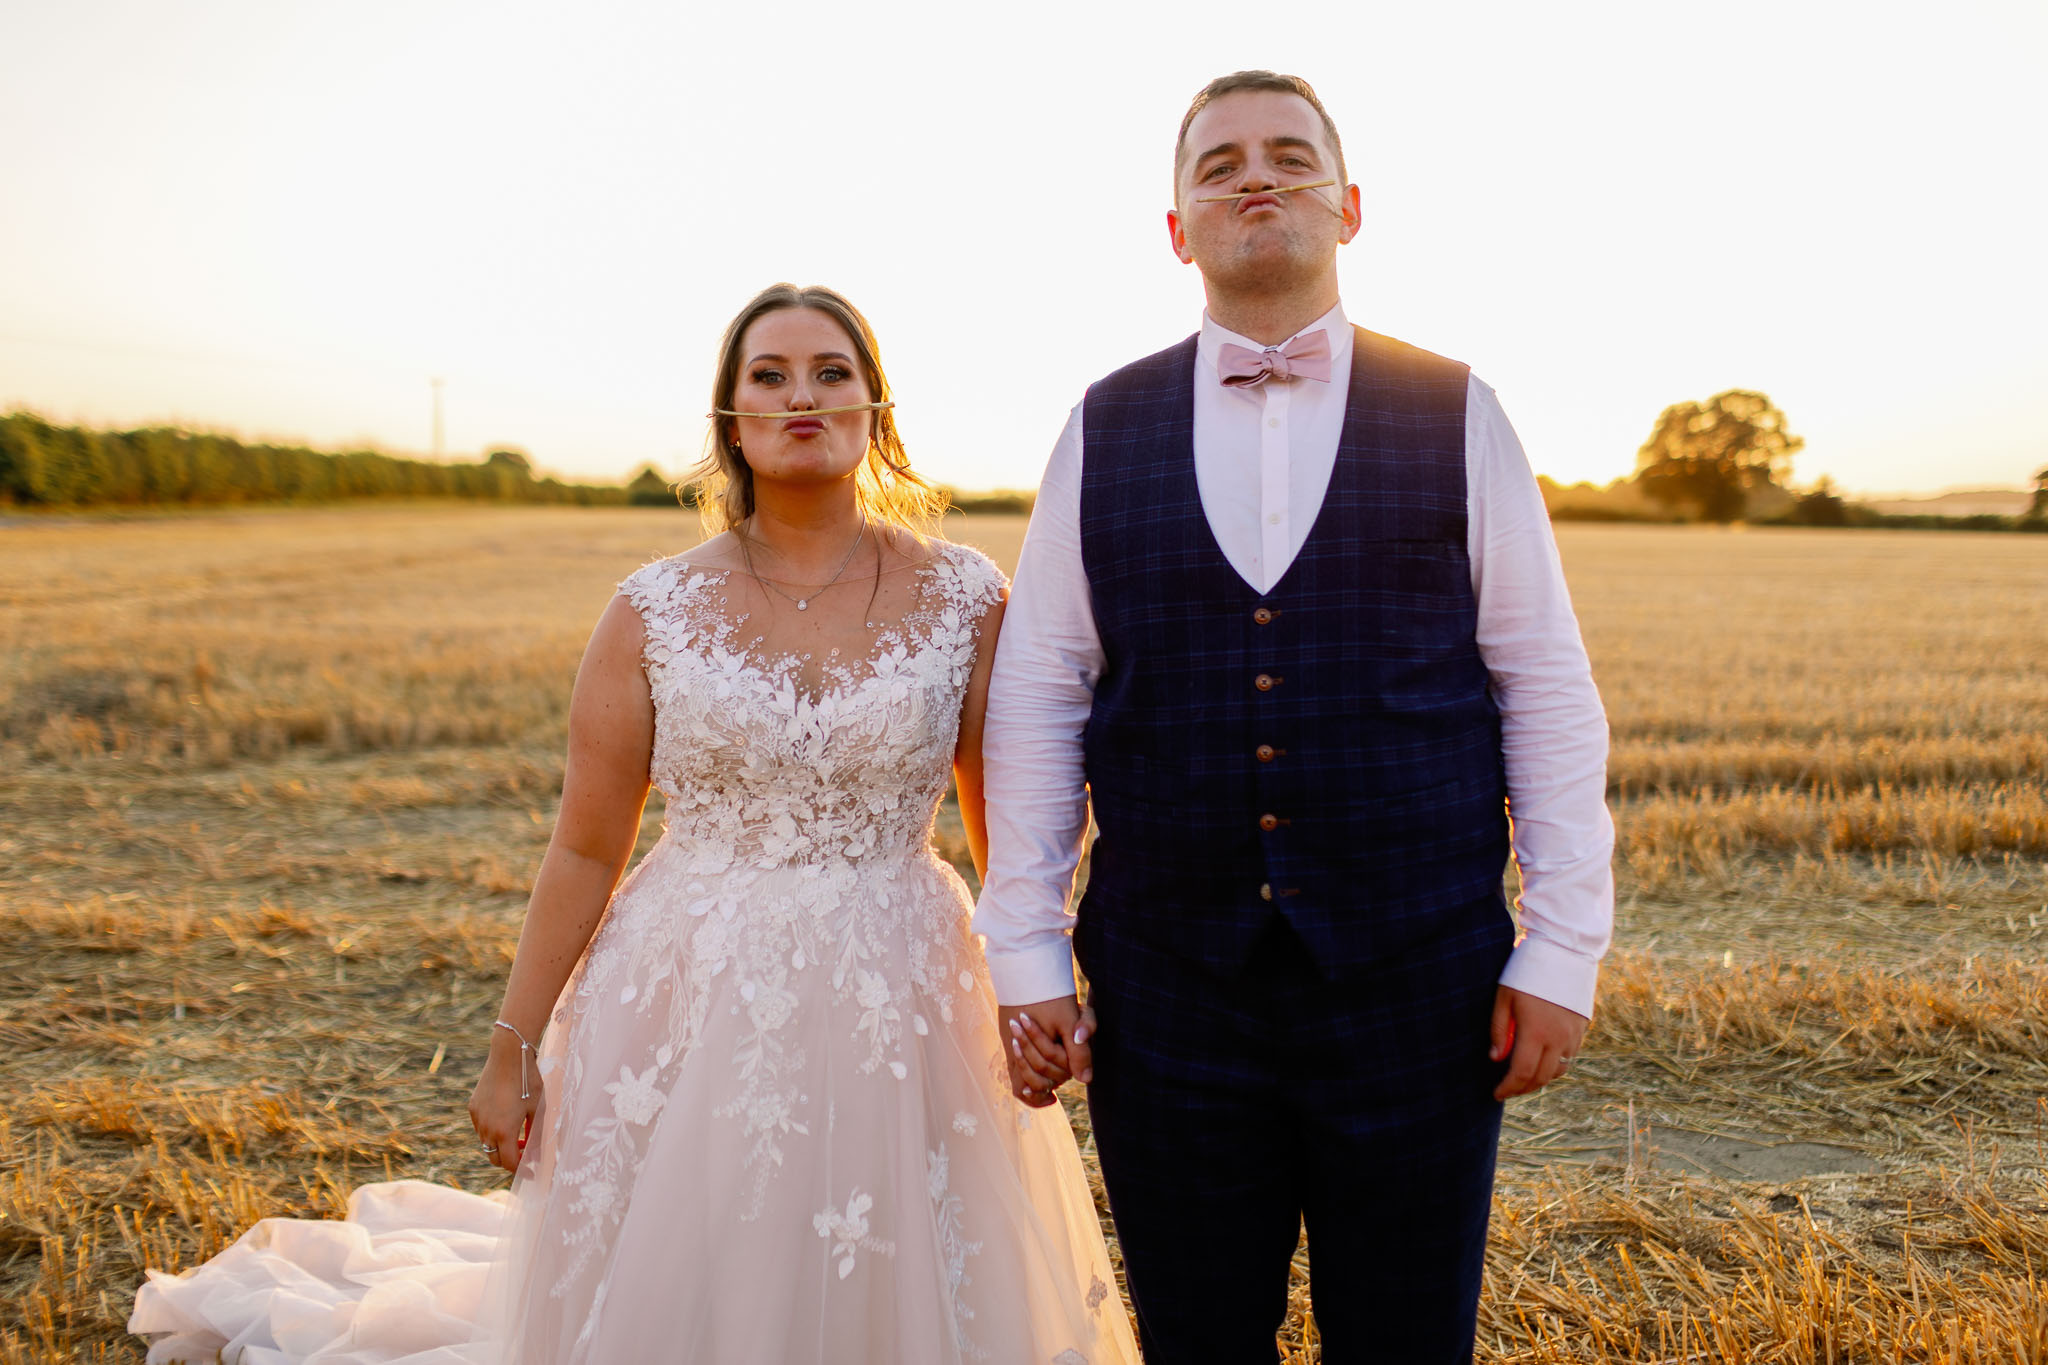 Fun Wedding Pictures of a bride and groom in a corn field